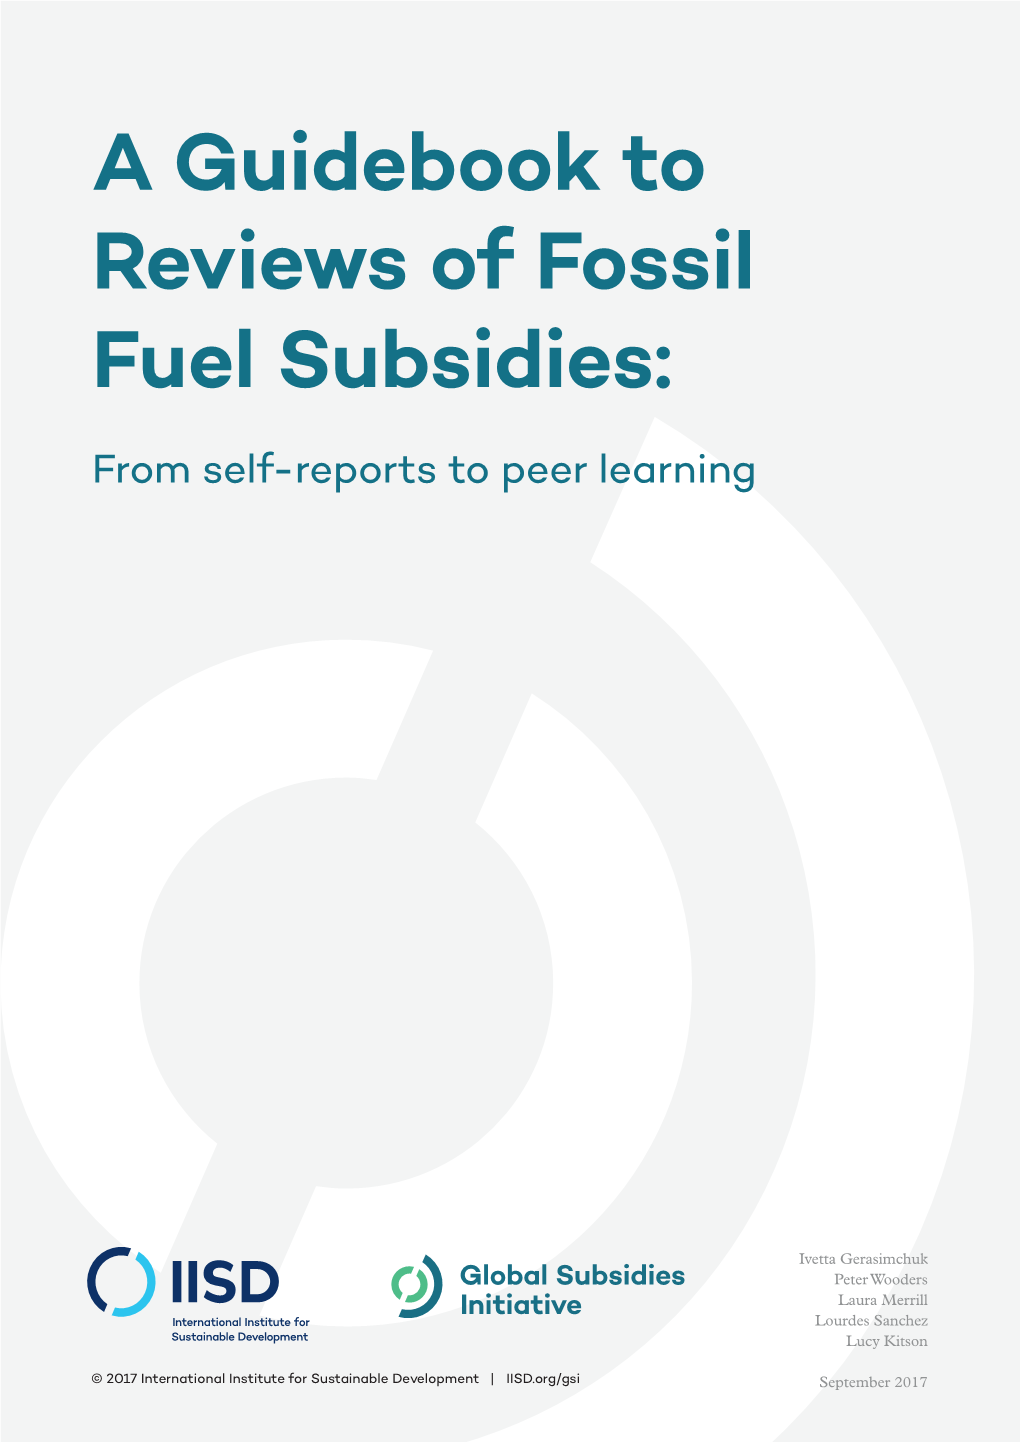 A Guidebook to Reviews of Fossil Fuel Subsidies